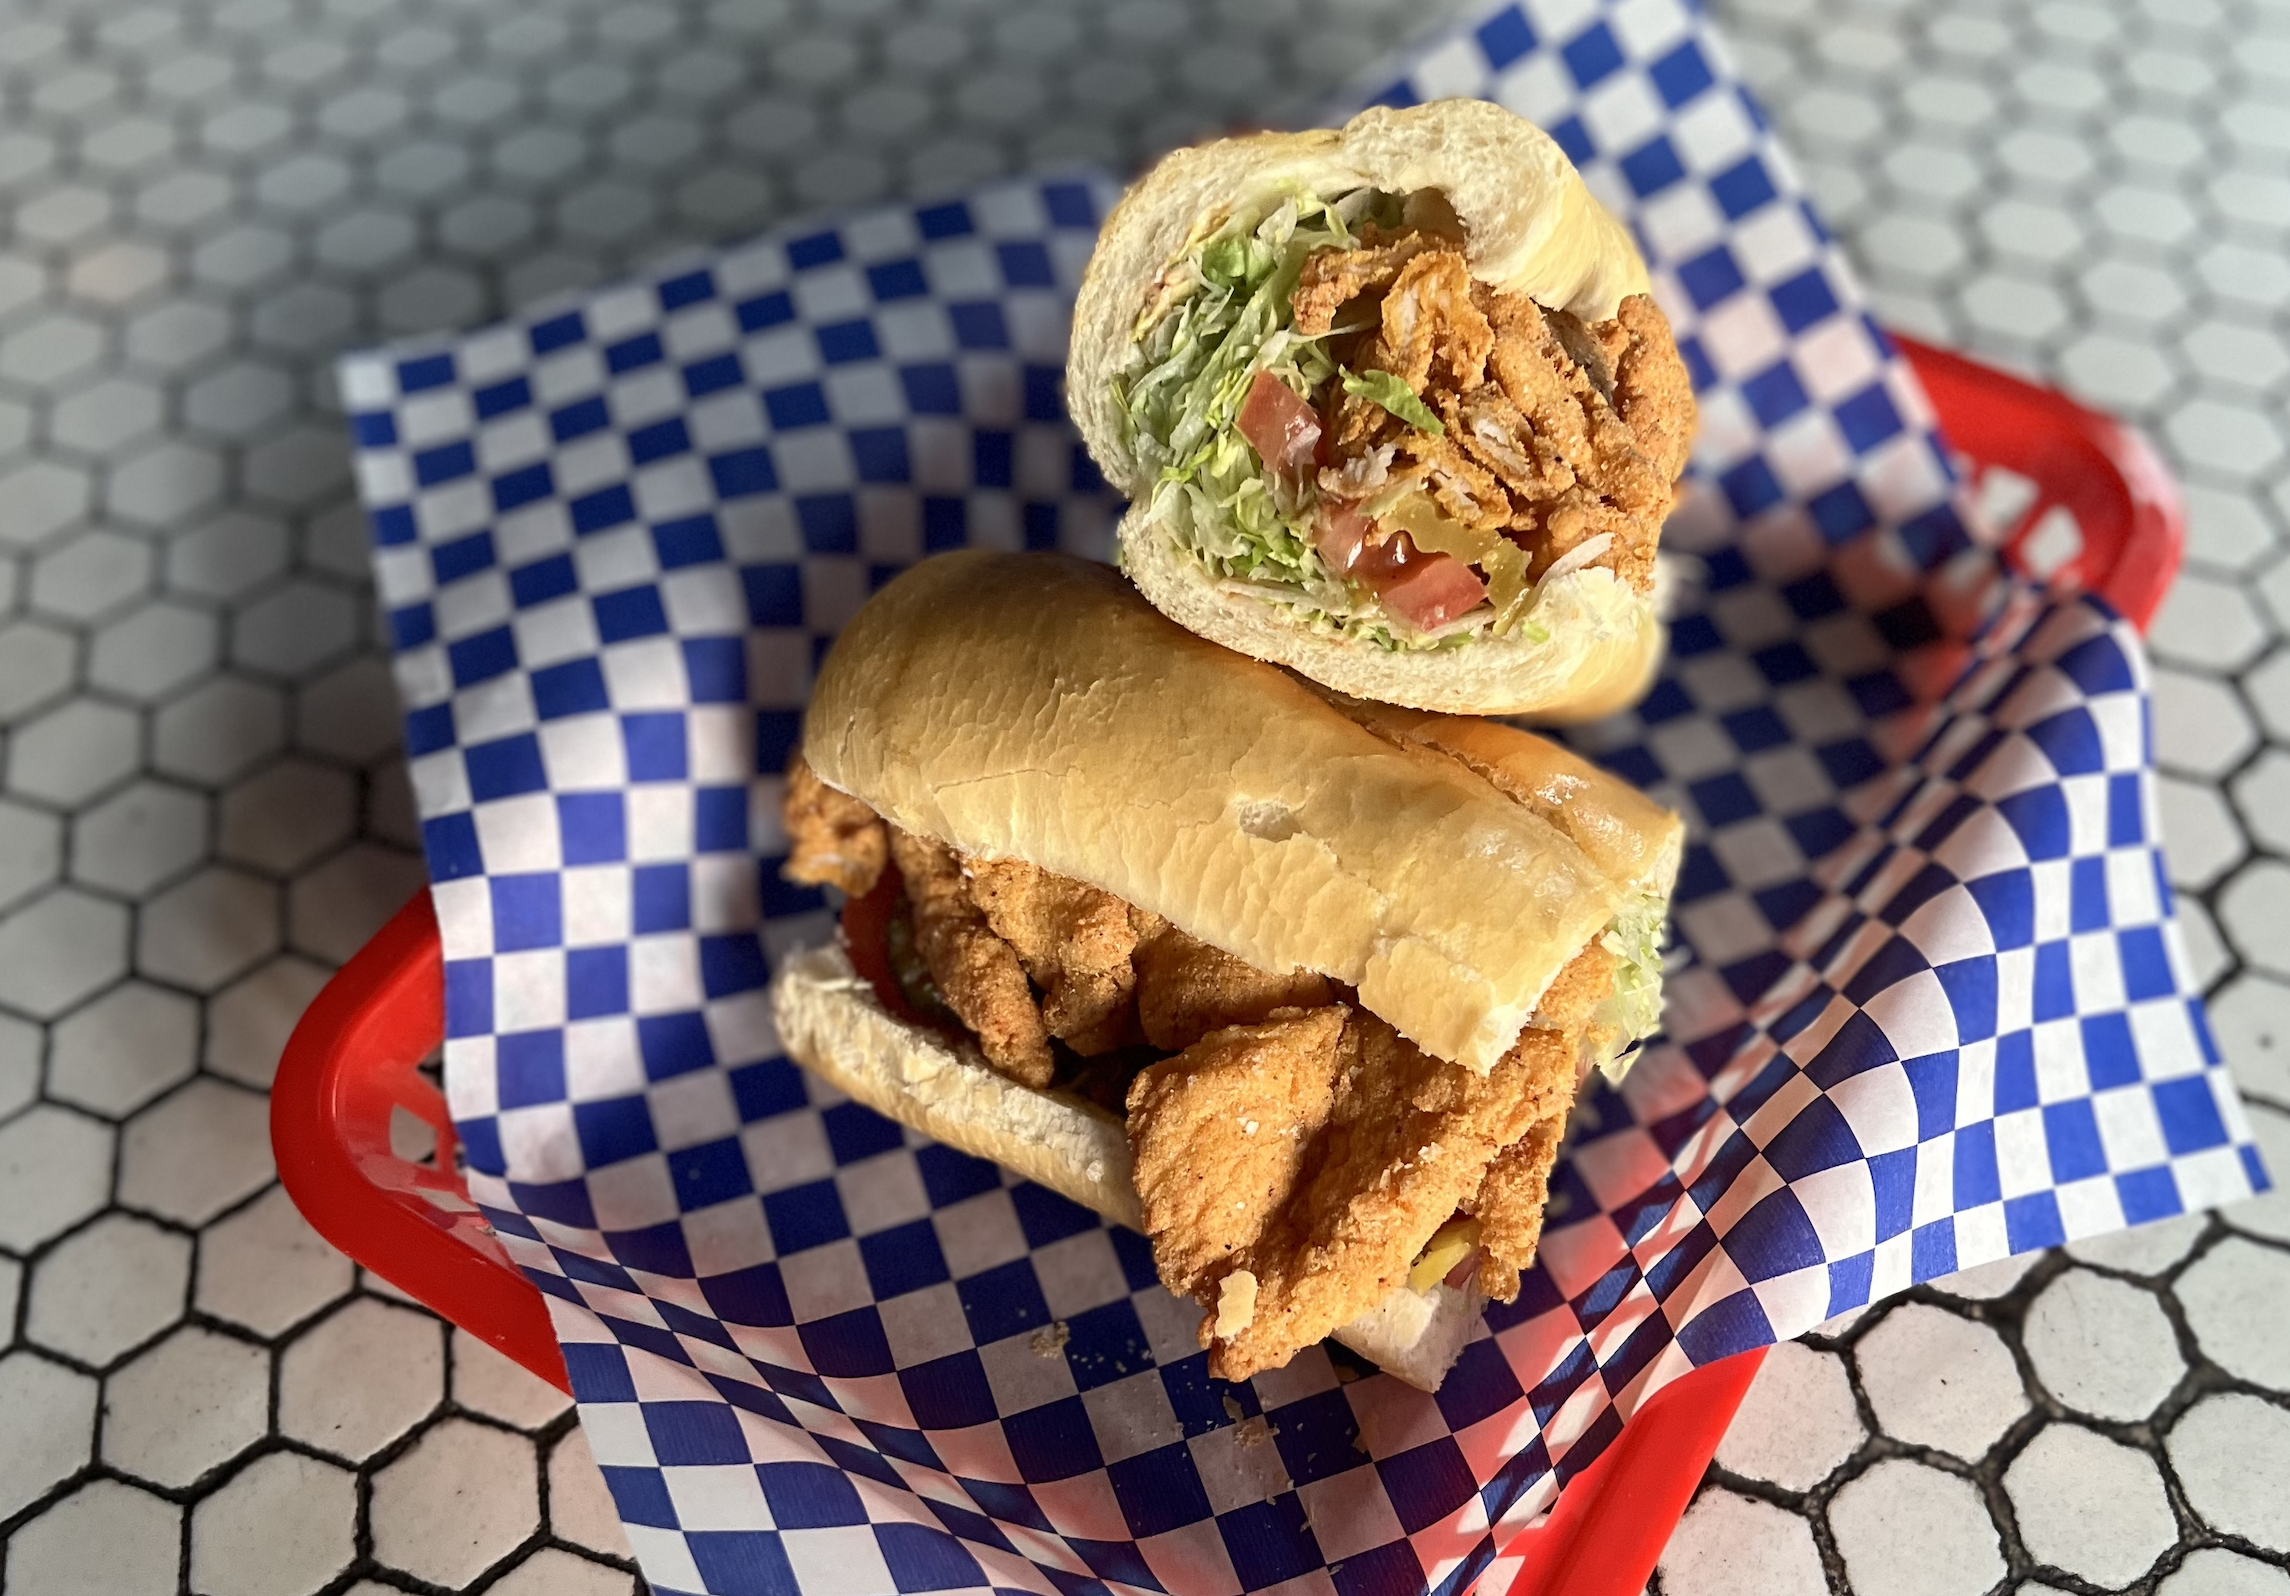 A catfish po’ boy from Lollipop Shoppe arrives cut in half in a red basket, lined with blue-and-white paper.